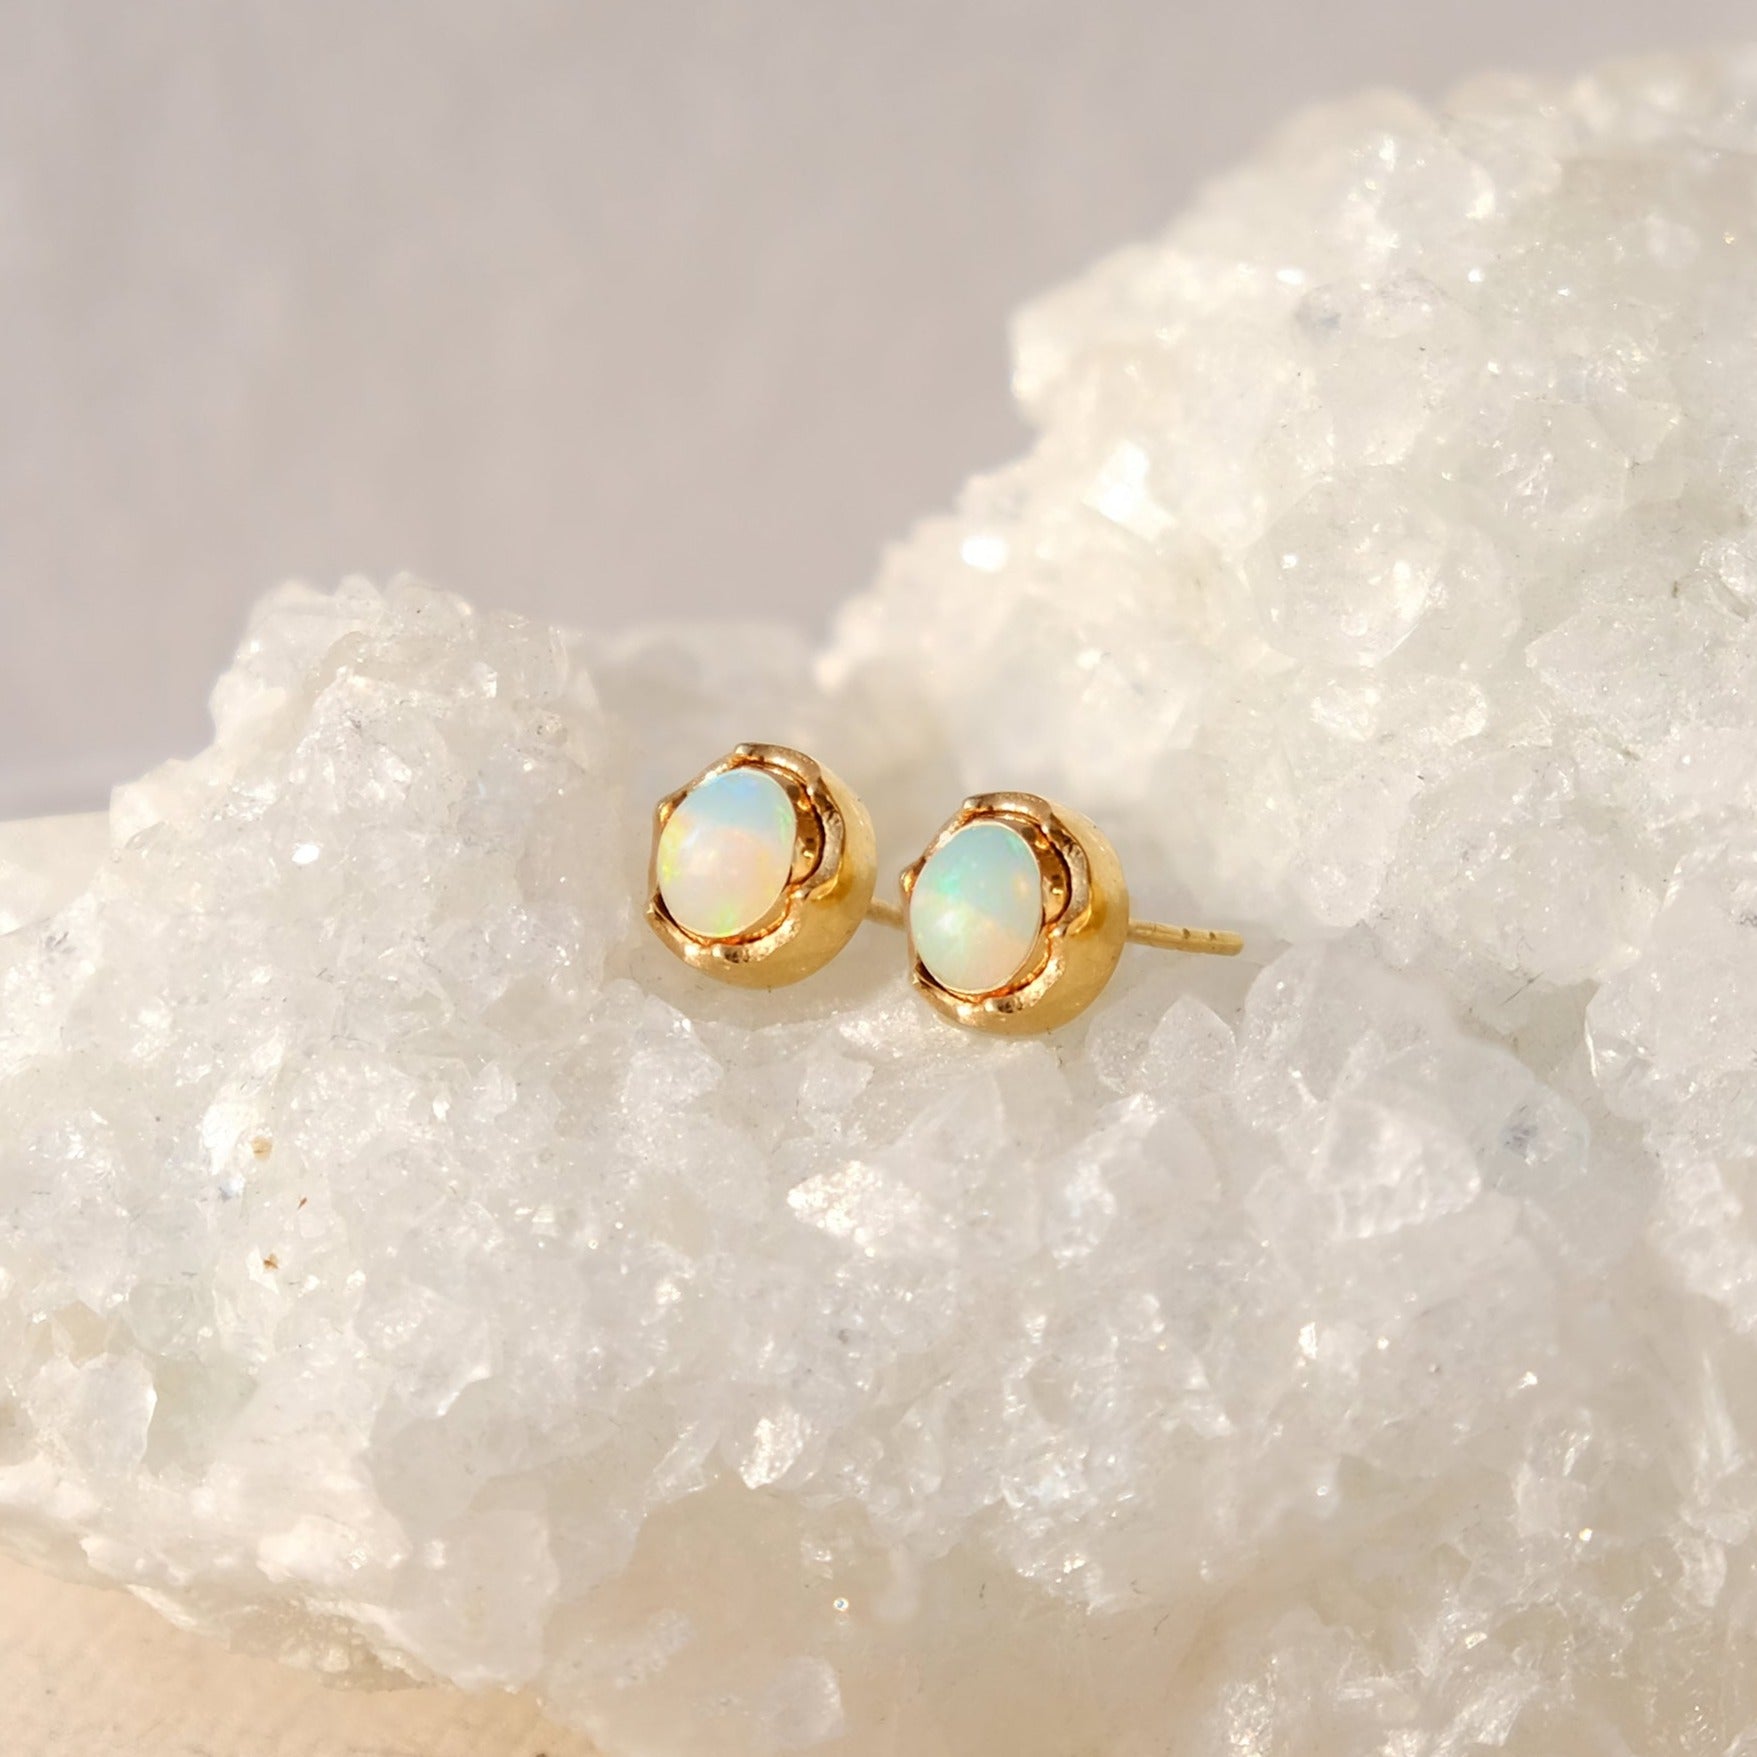 GOLD AND OPAL STUD EARRINGS